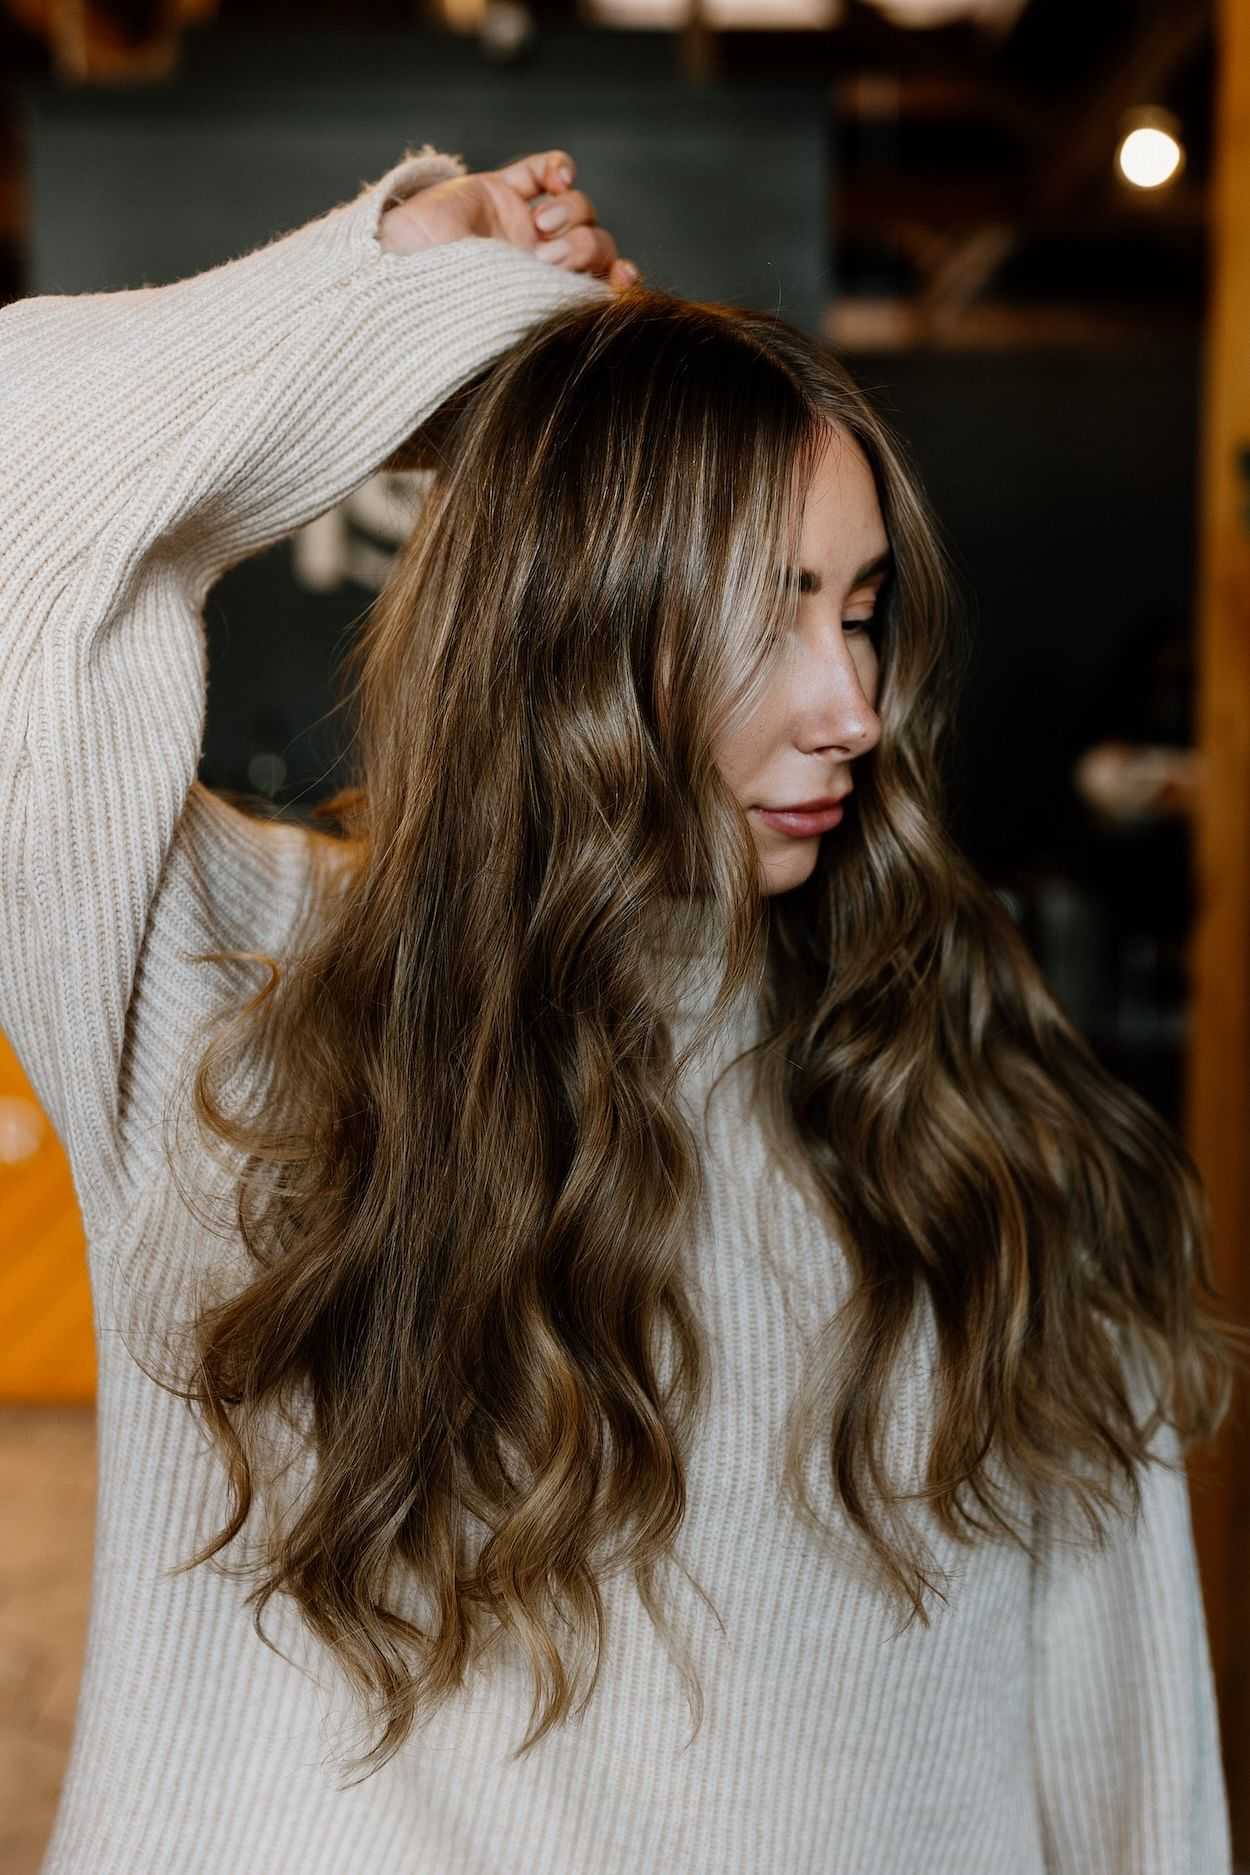 Woman with long wavy hair posing in a cozy indoor setting.